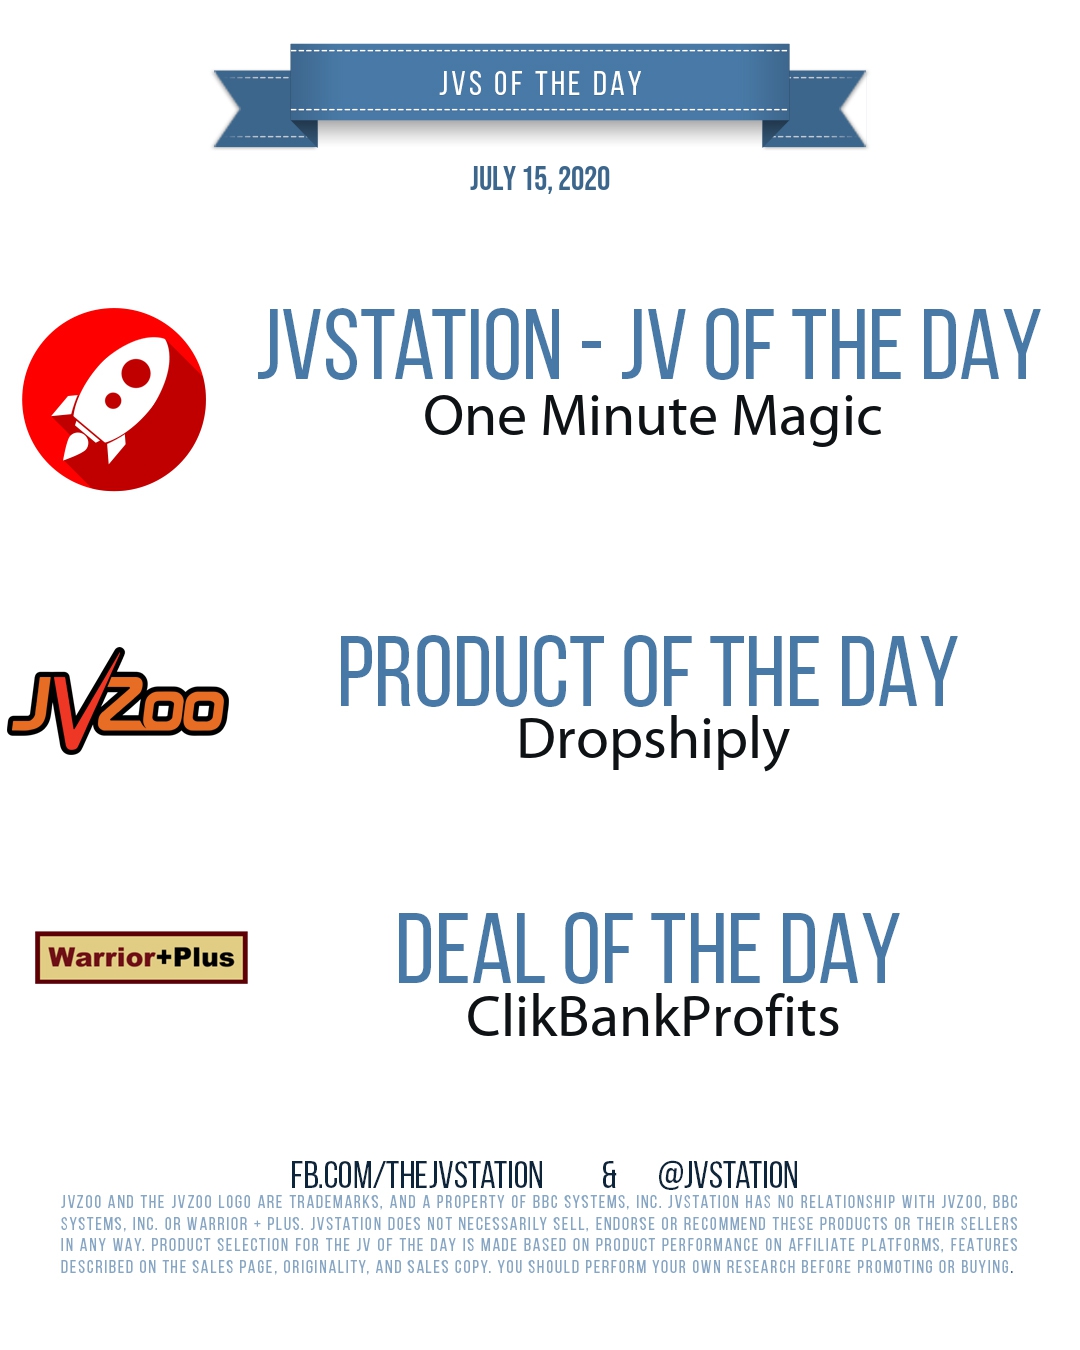 JVs of the day - July 15, 2020